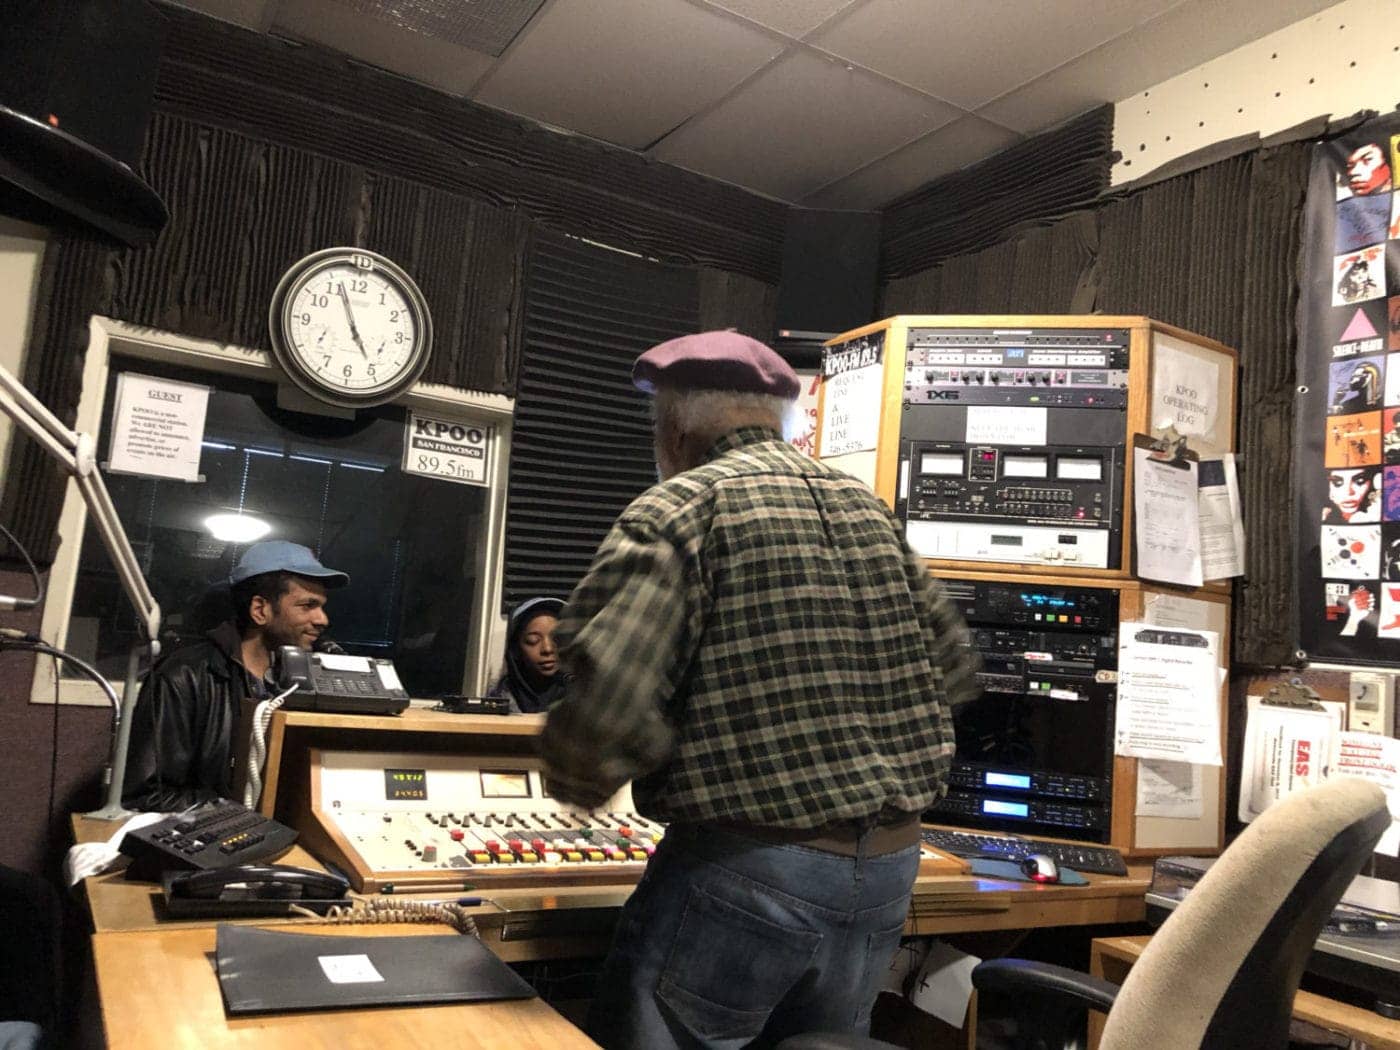 Terry-Collins-in-KPOO-studio-by-Arlene-Eisen-1400x1050, The community celebrates Terry Collins, long time warrior for the people, Local News & Views 